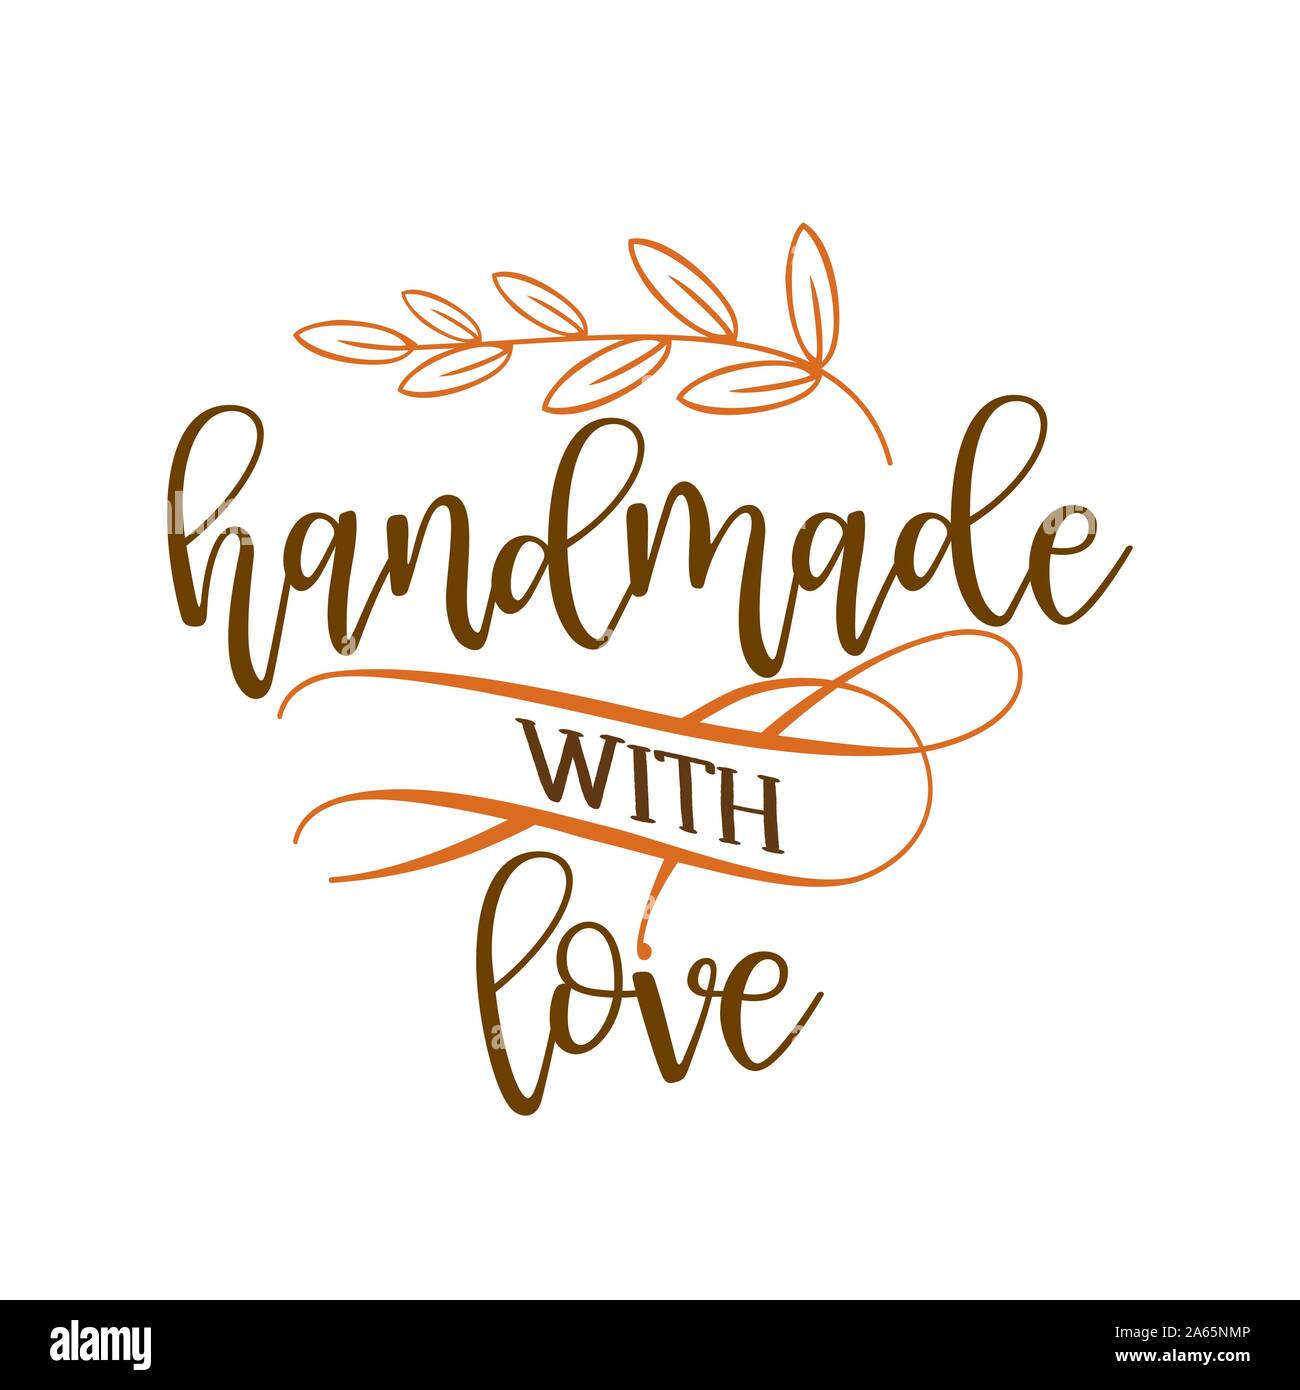 Handmade with love - stamp for homemade products and shops. Vector badge, label. Vector Illustration on a white background Stock Vector